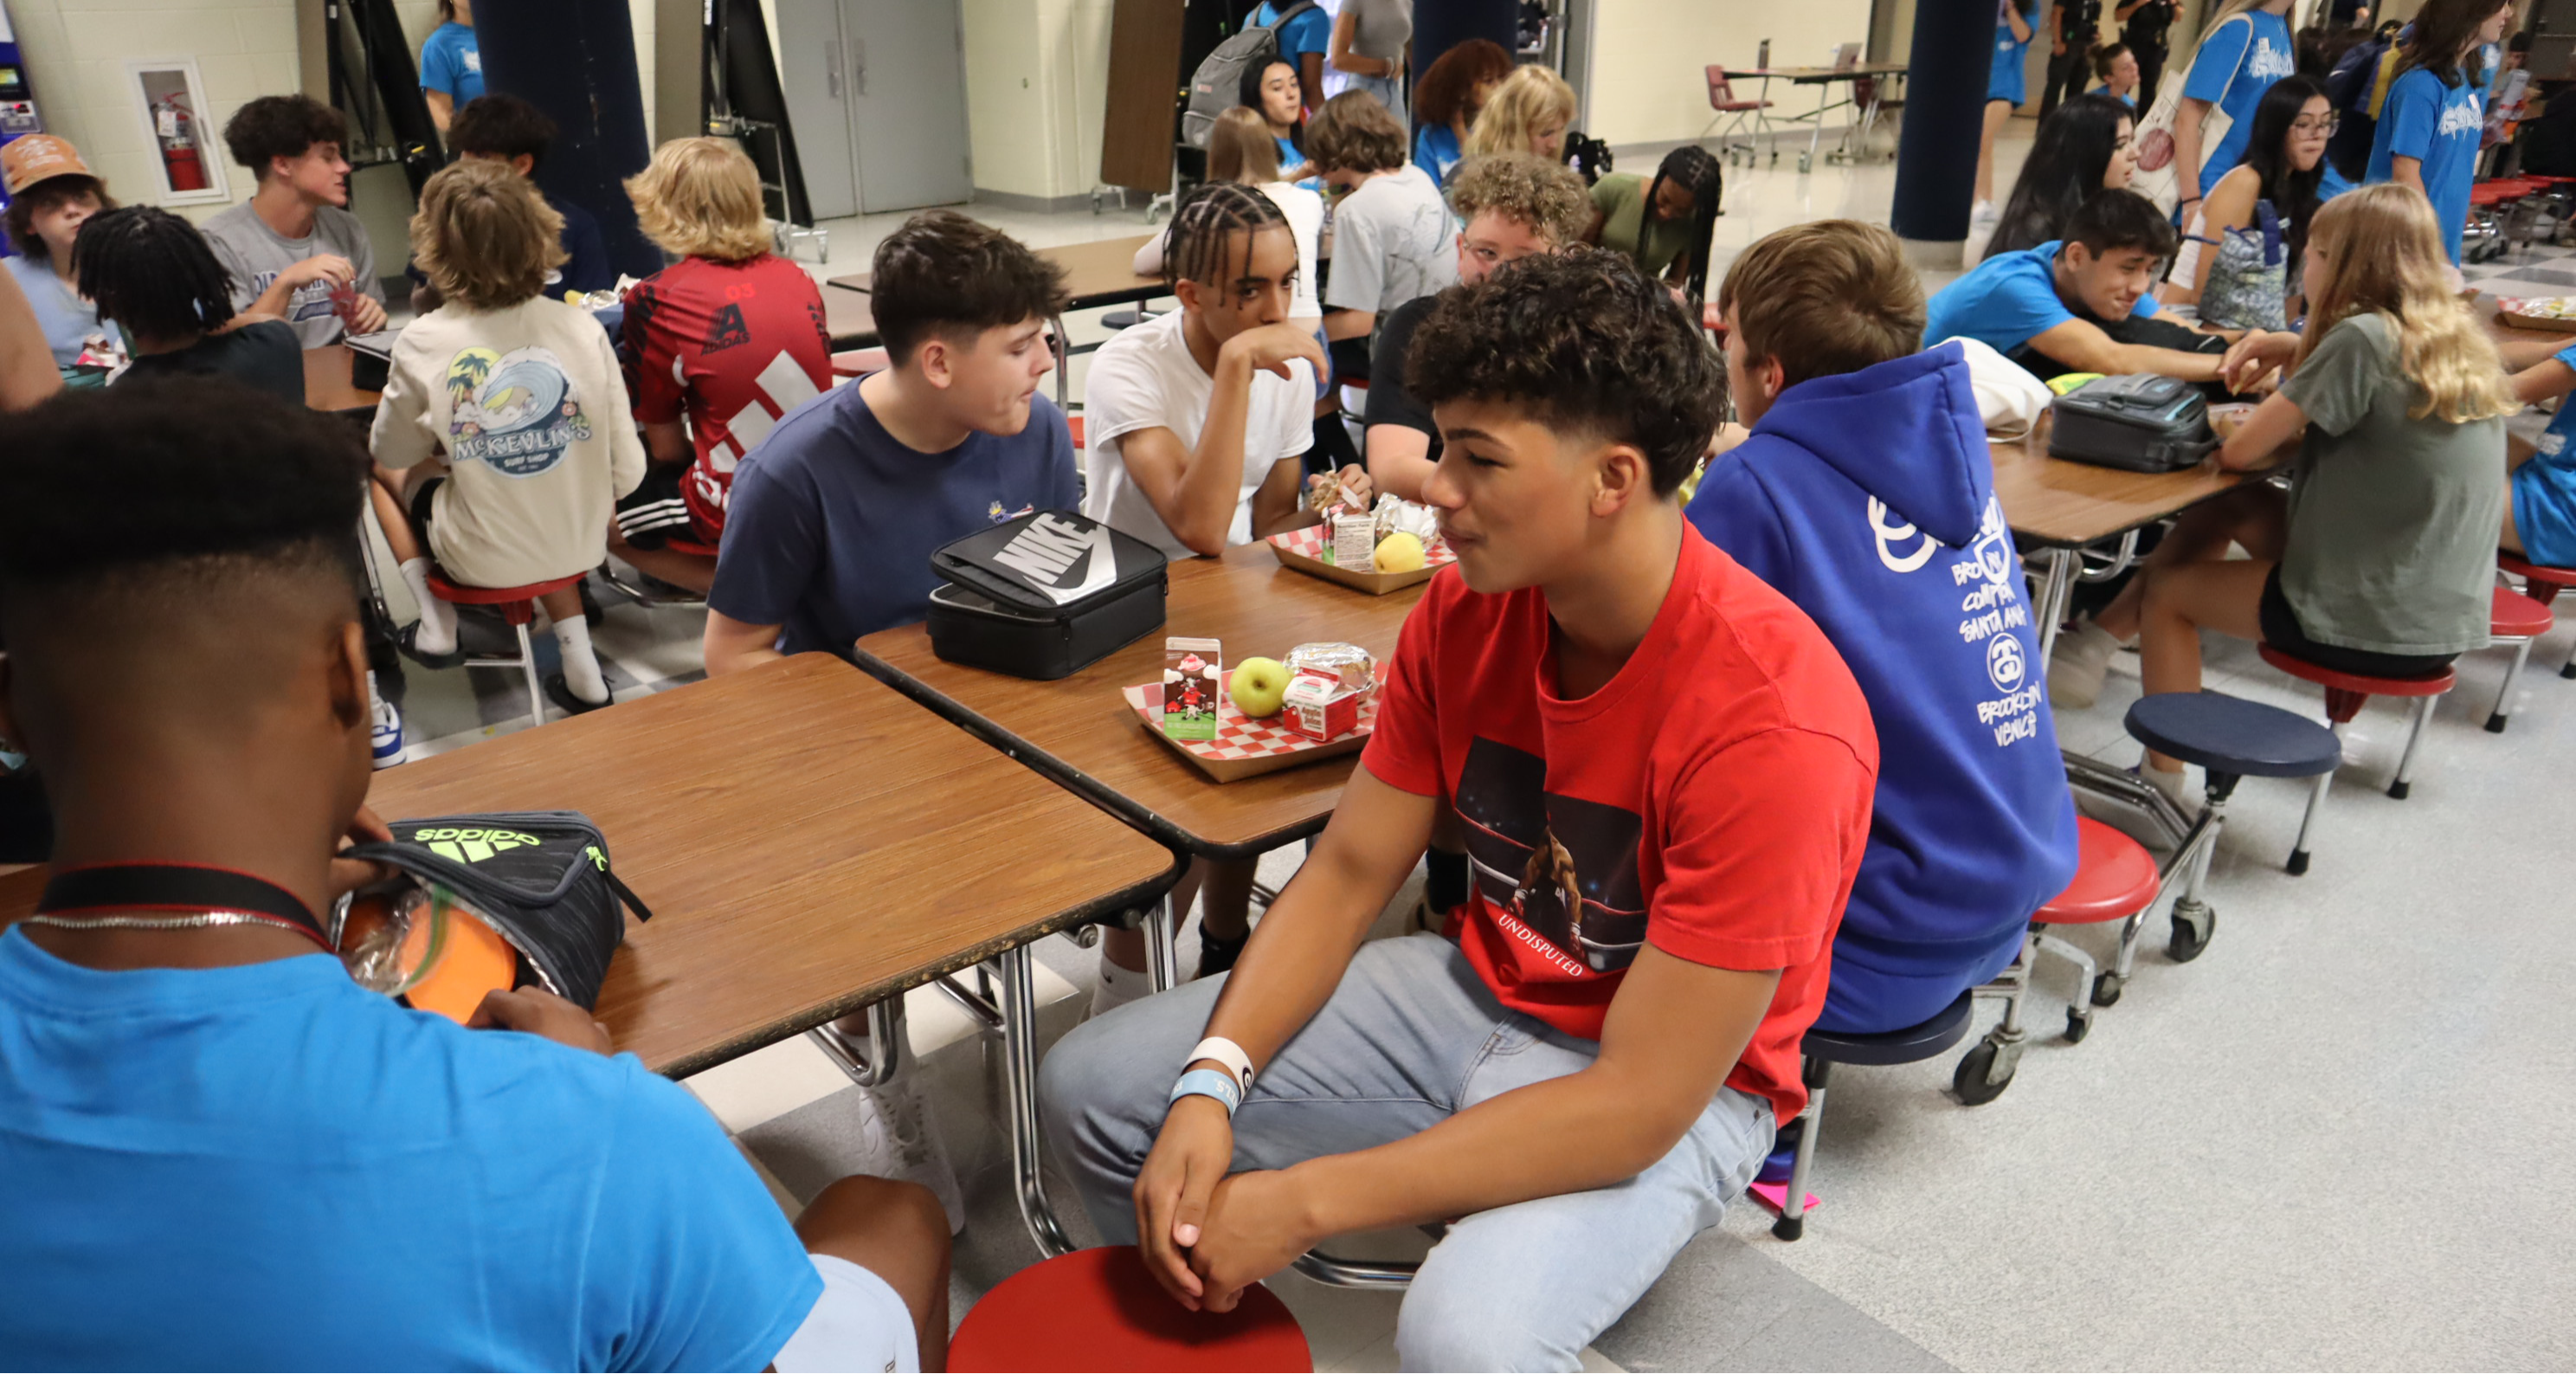 Students eating lunch in the school cafeteria